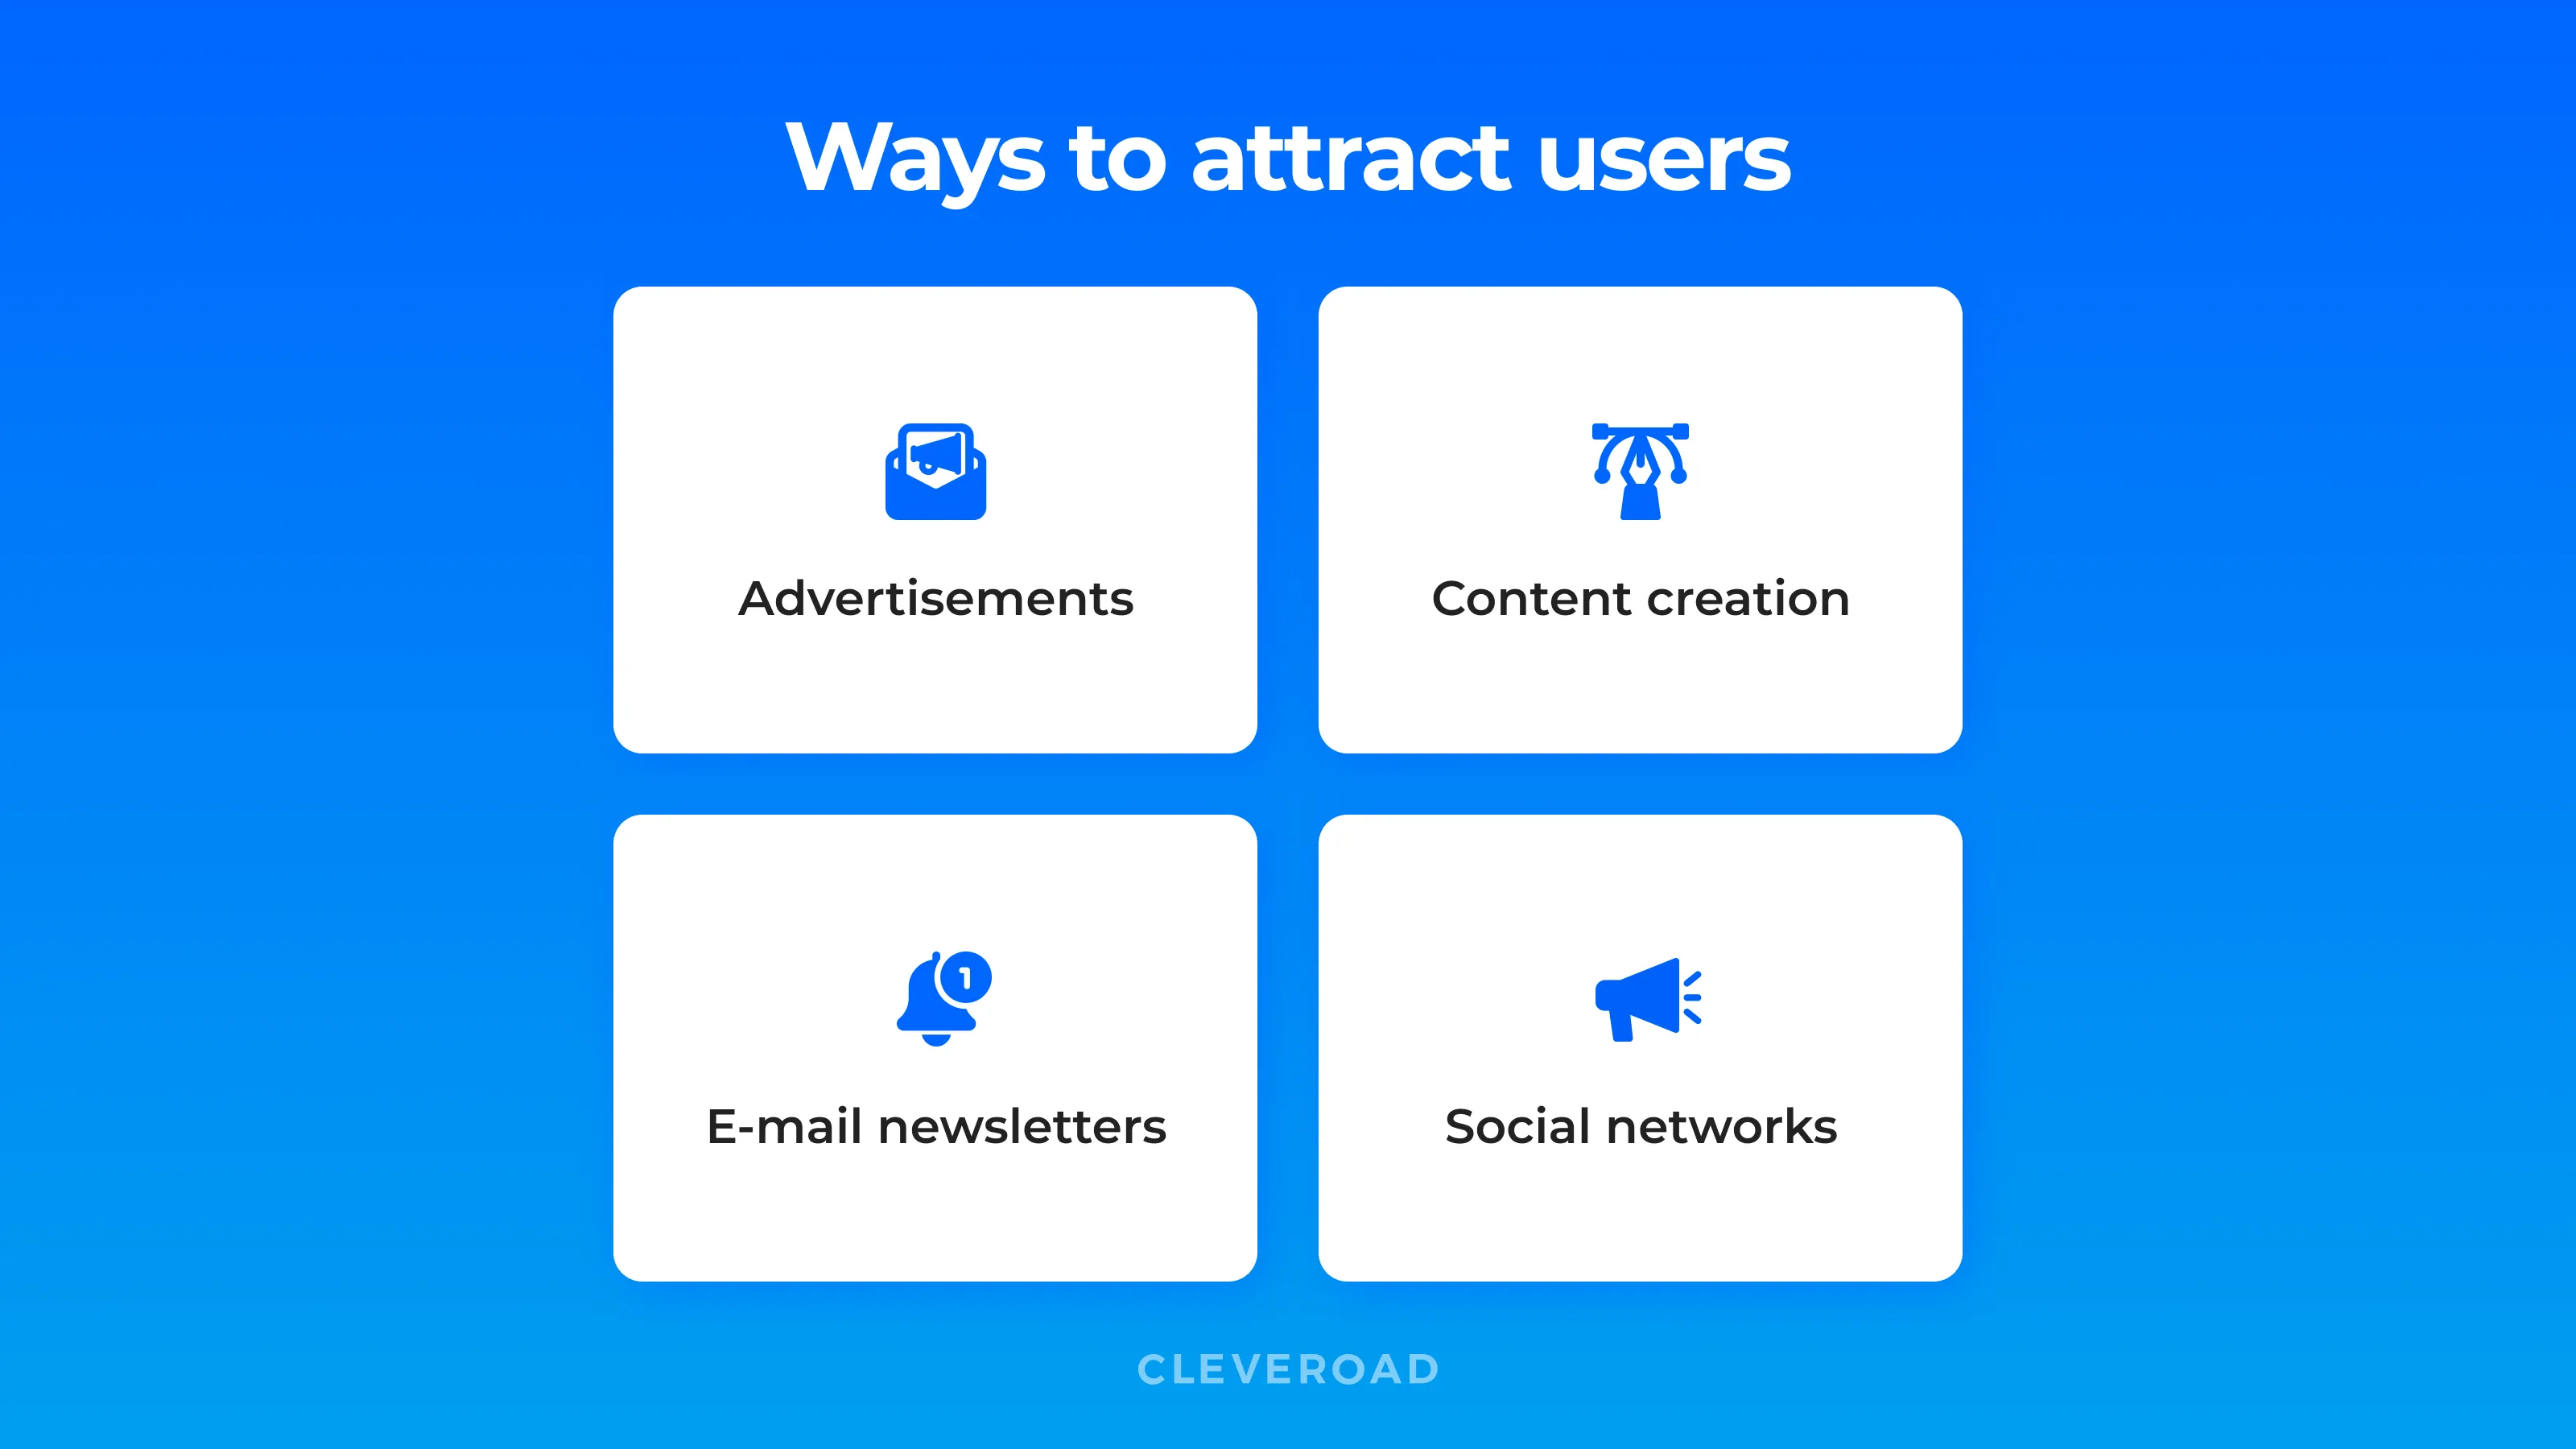 Q&A website. 4 Ways to Attract Users